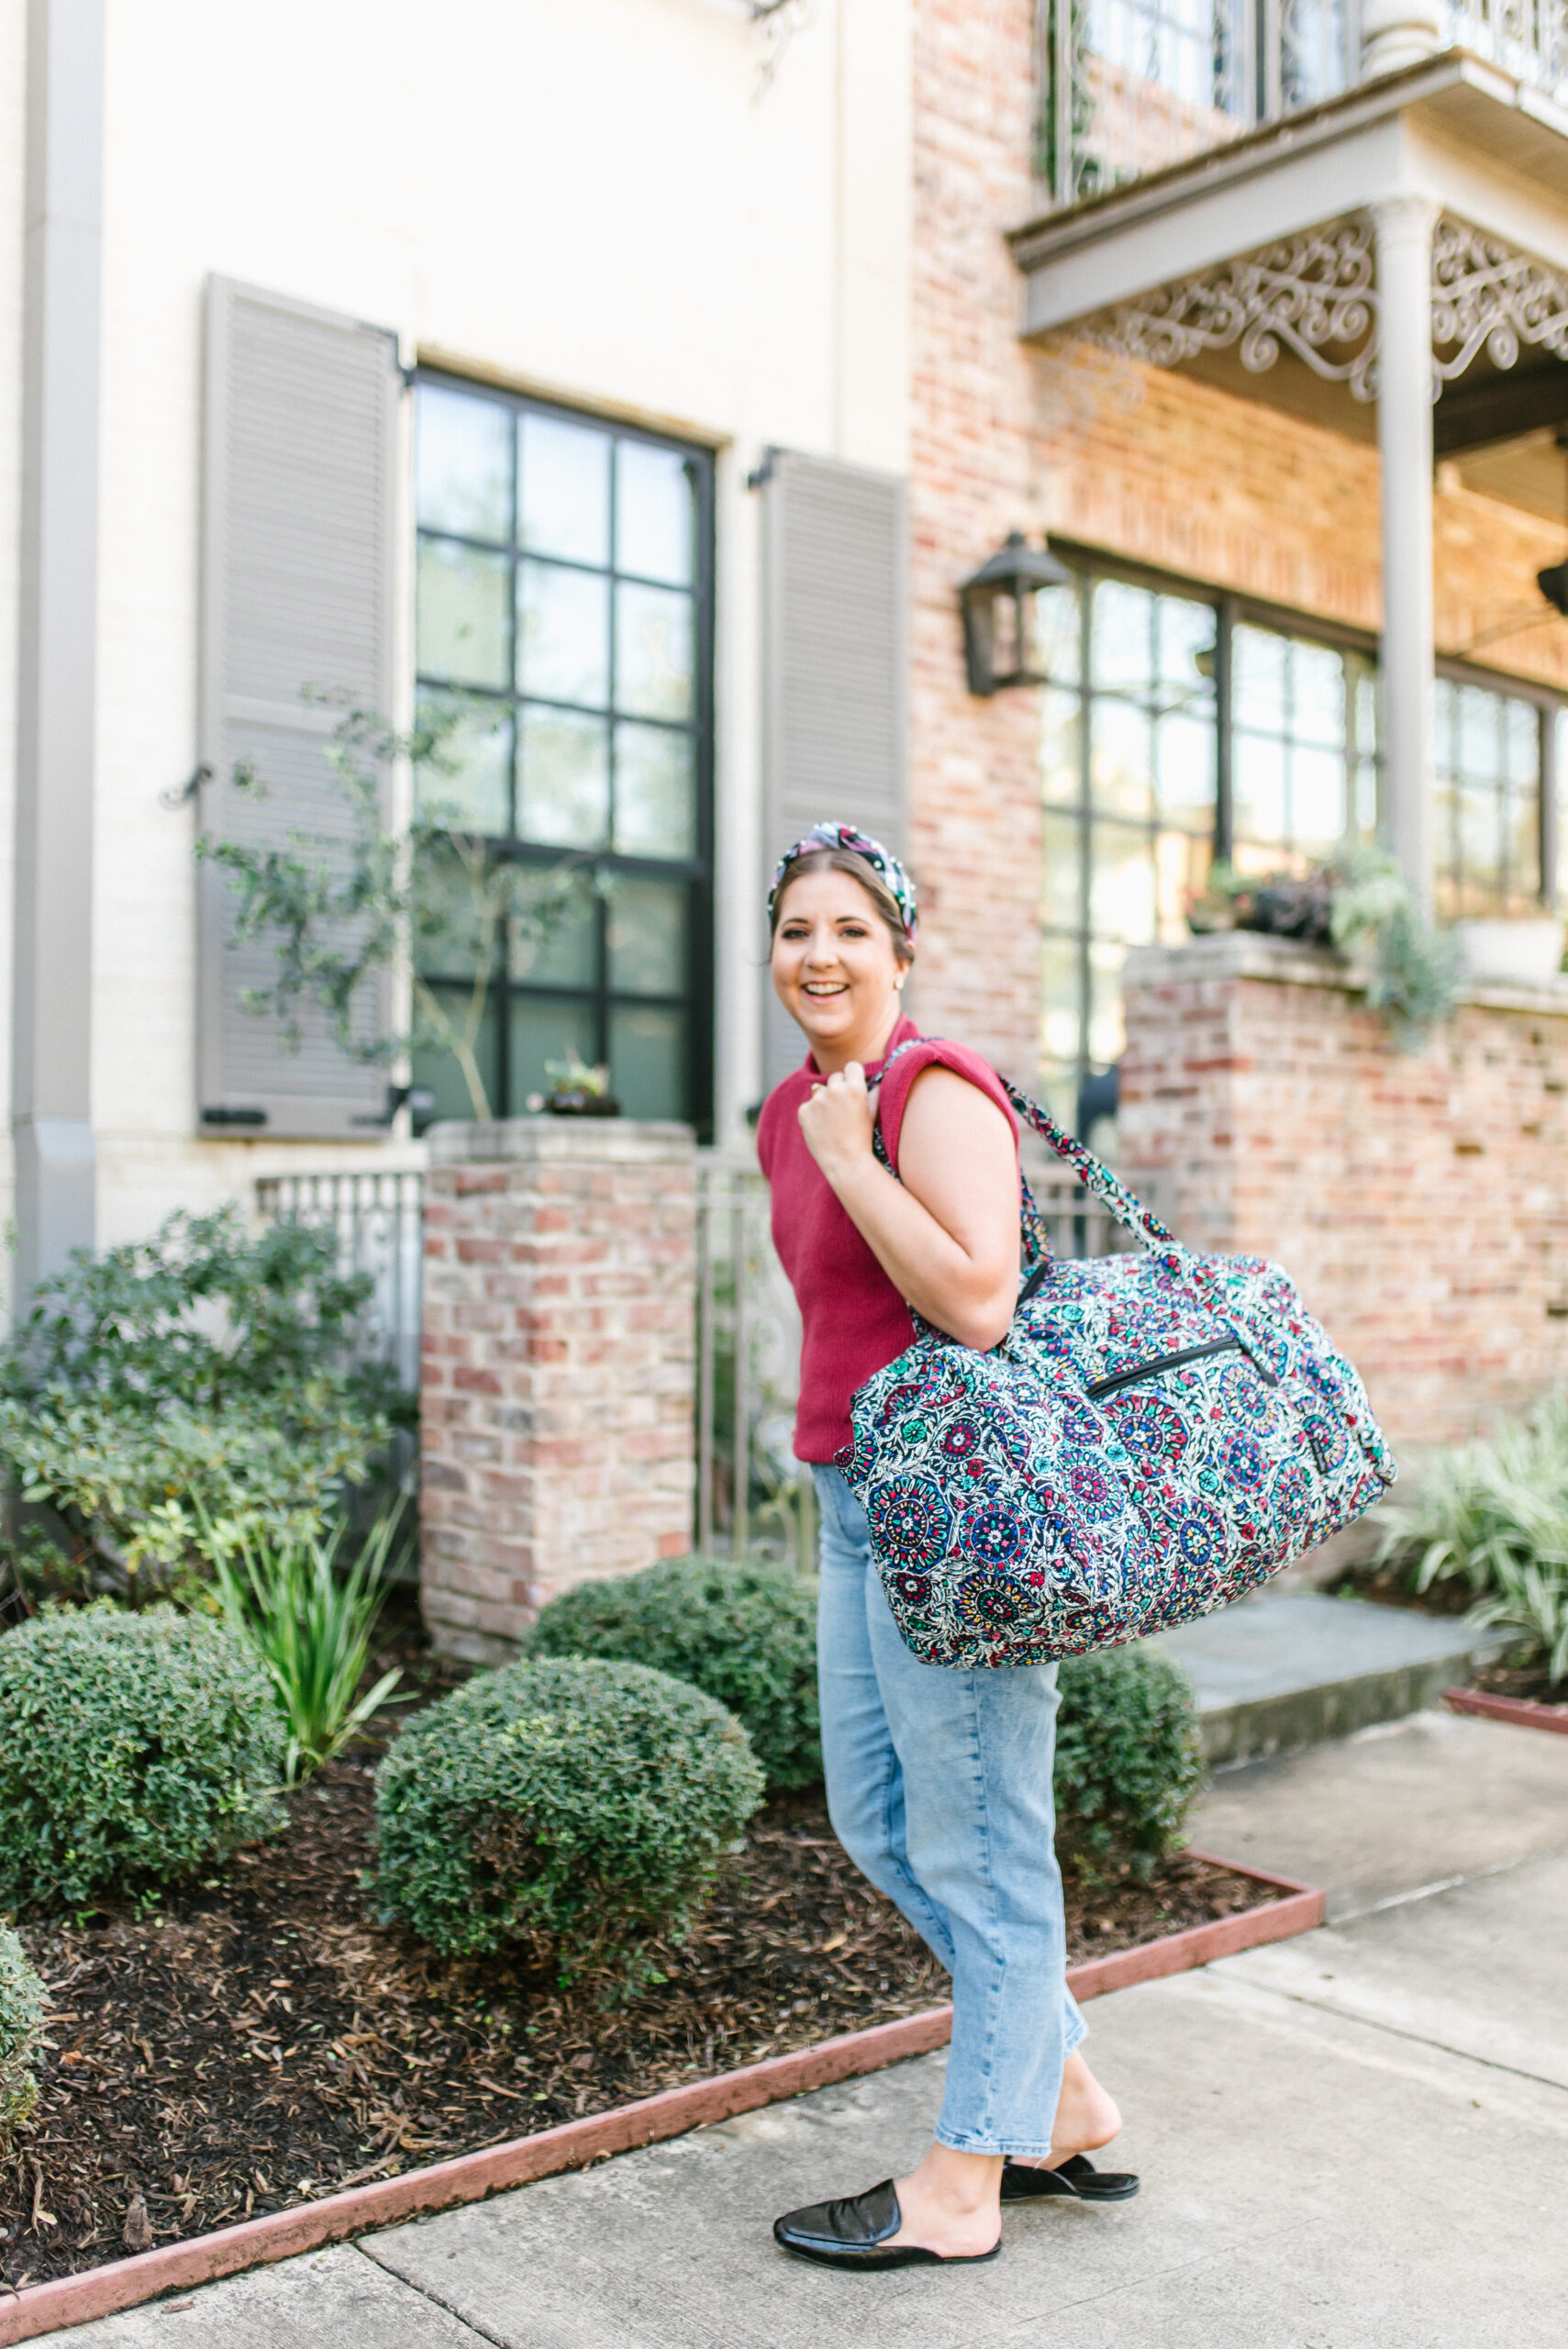 What You Should Add To Your Wish List from Vera Bradley